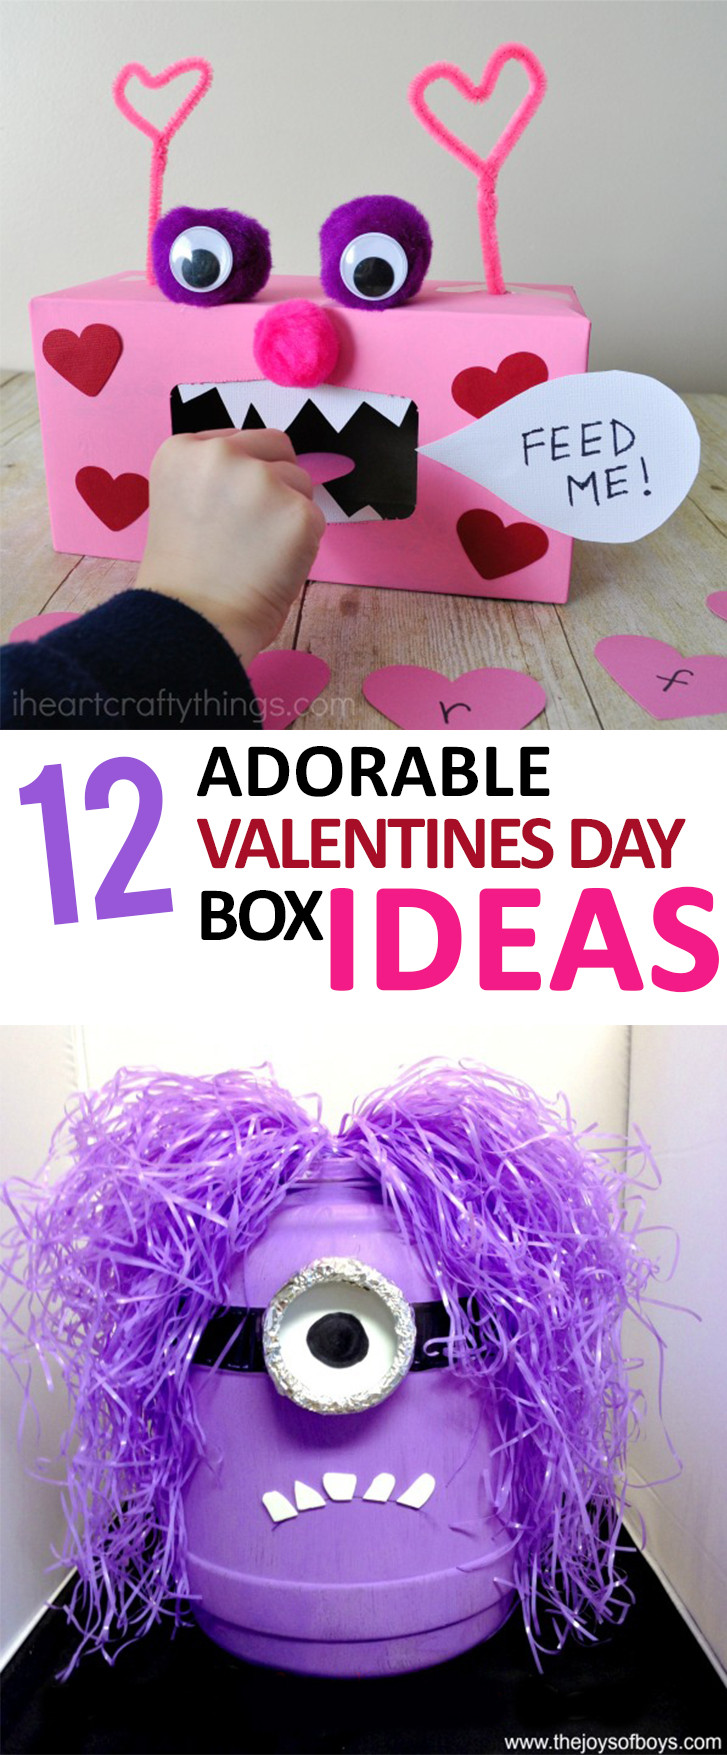 Ideas For Valentines Day
 12 Adorable Valentines Day Box Ideas – Sunlit Spaces